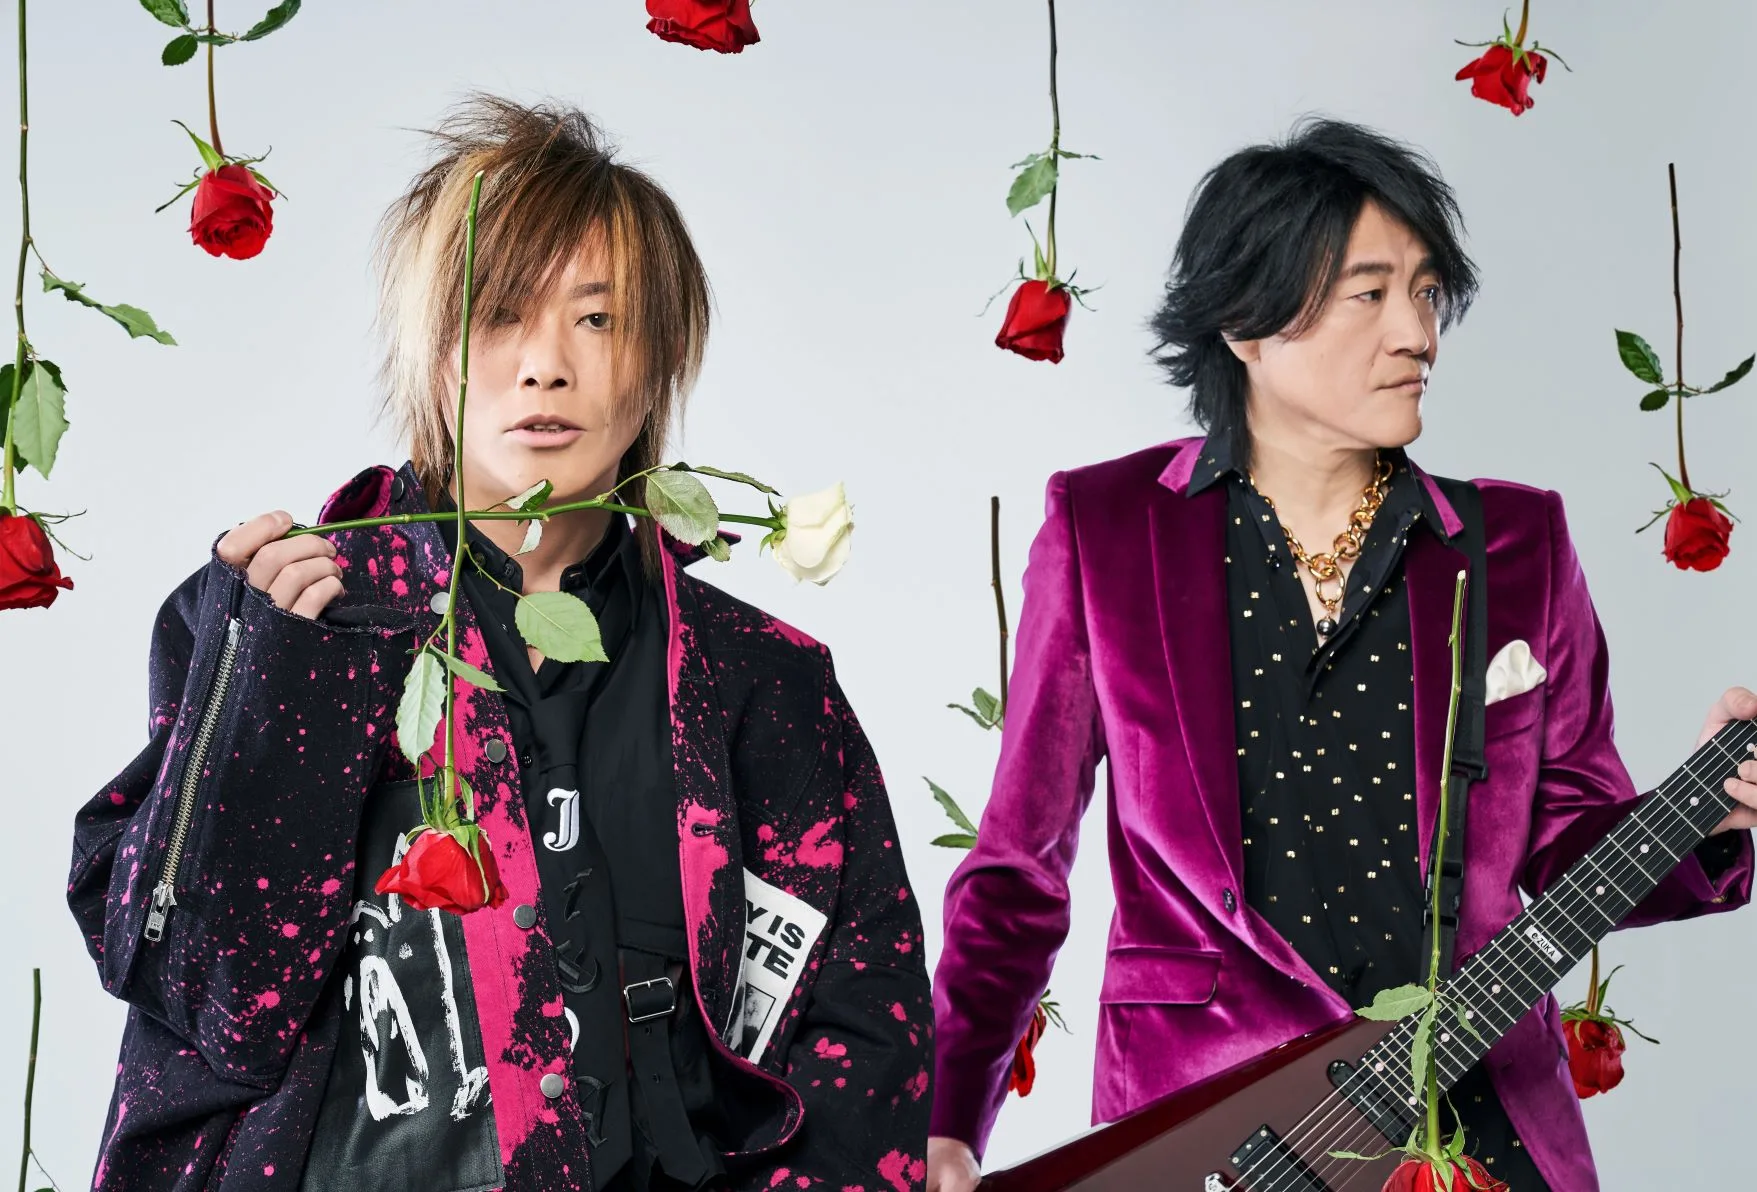 『GRANRODEO Live Session "Rodeo Note" vol.2』 フジテレビTWOにて完全生中継決定！